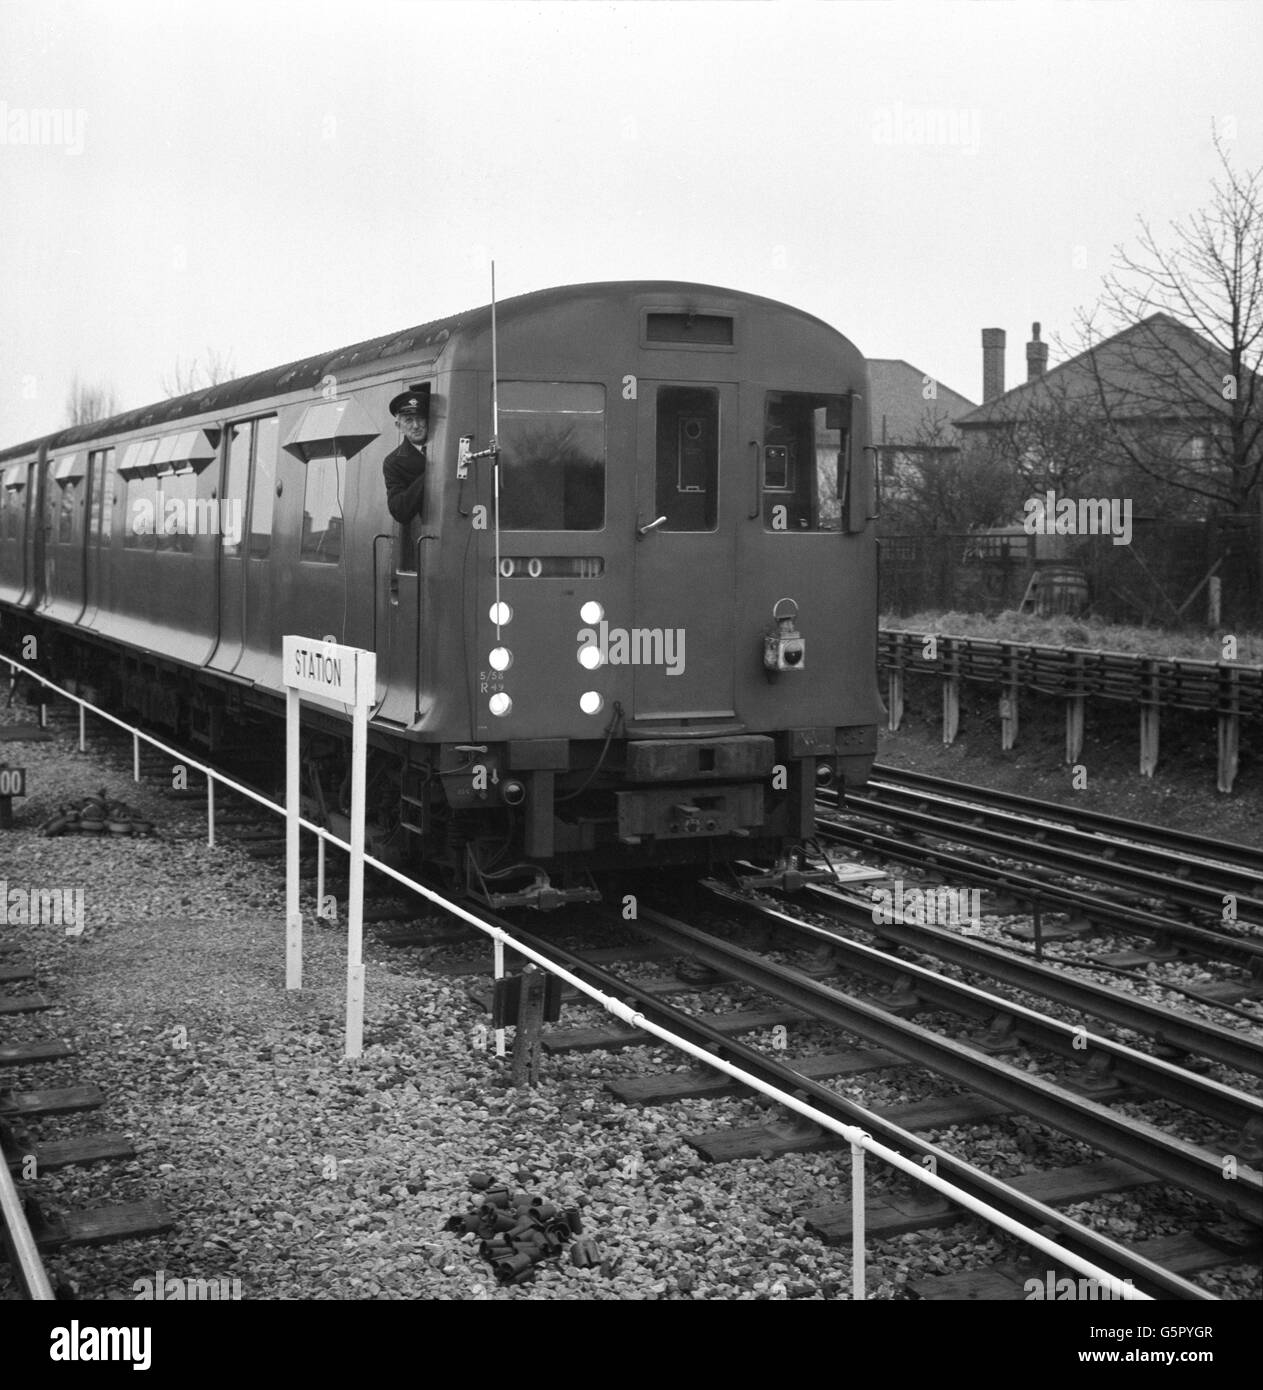 A specially-equipped District Line train on the move at South Ealing, London, which is being used by London Transport in trials to decide the feasibility of driving trains automatically. The first tests are being carried out along a one-mile stretch of track between South Ealing and Acton Town. In the cab is Jack Sharpley, of Hounslow, Middlesex, a test driver who has been taking part in the project for 11 years. Stock Photo